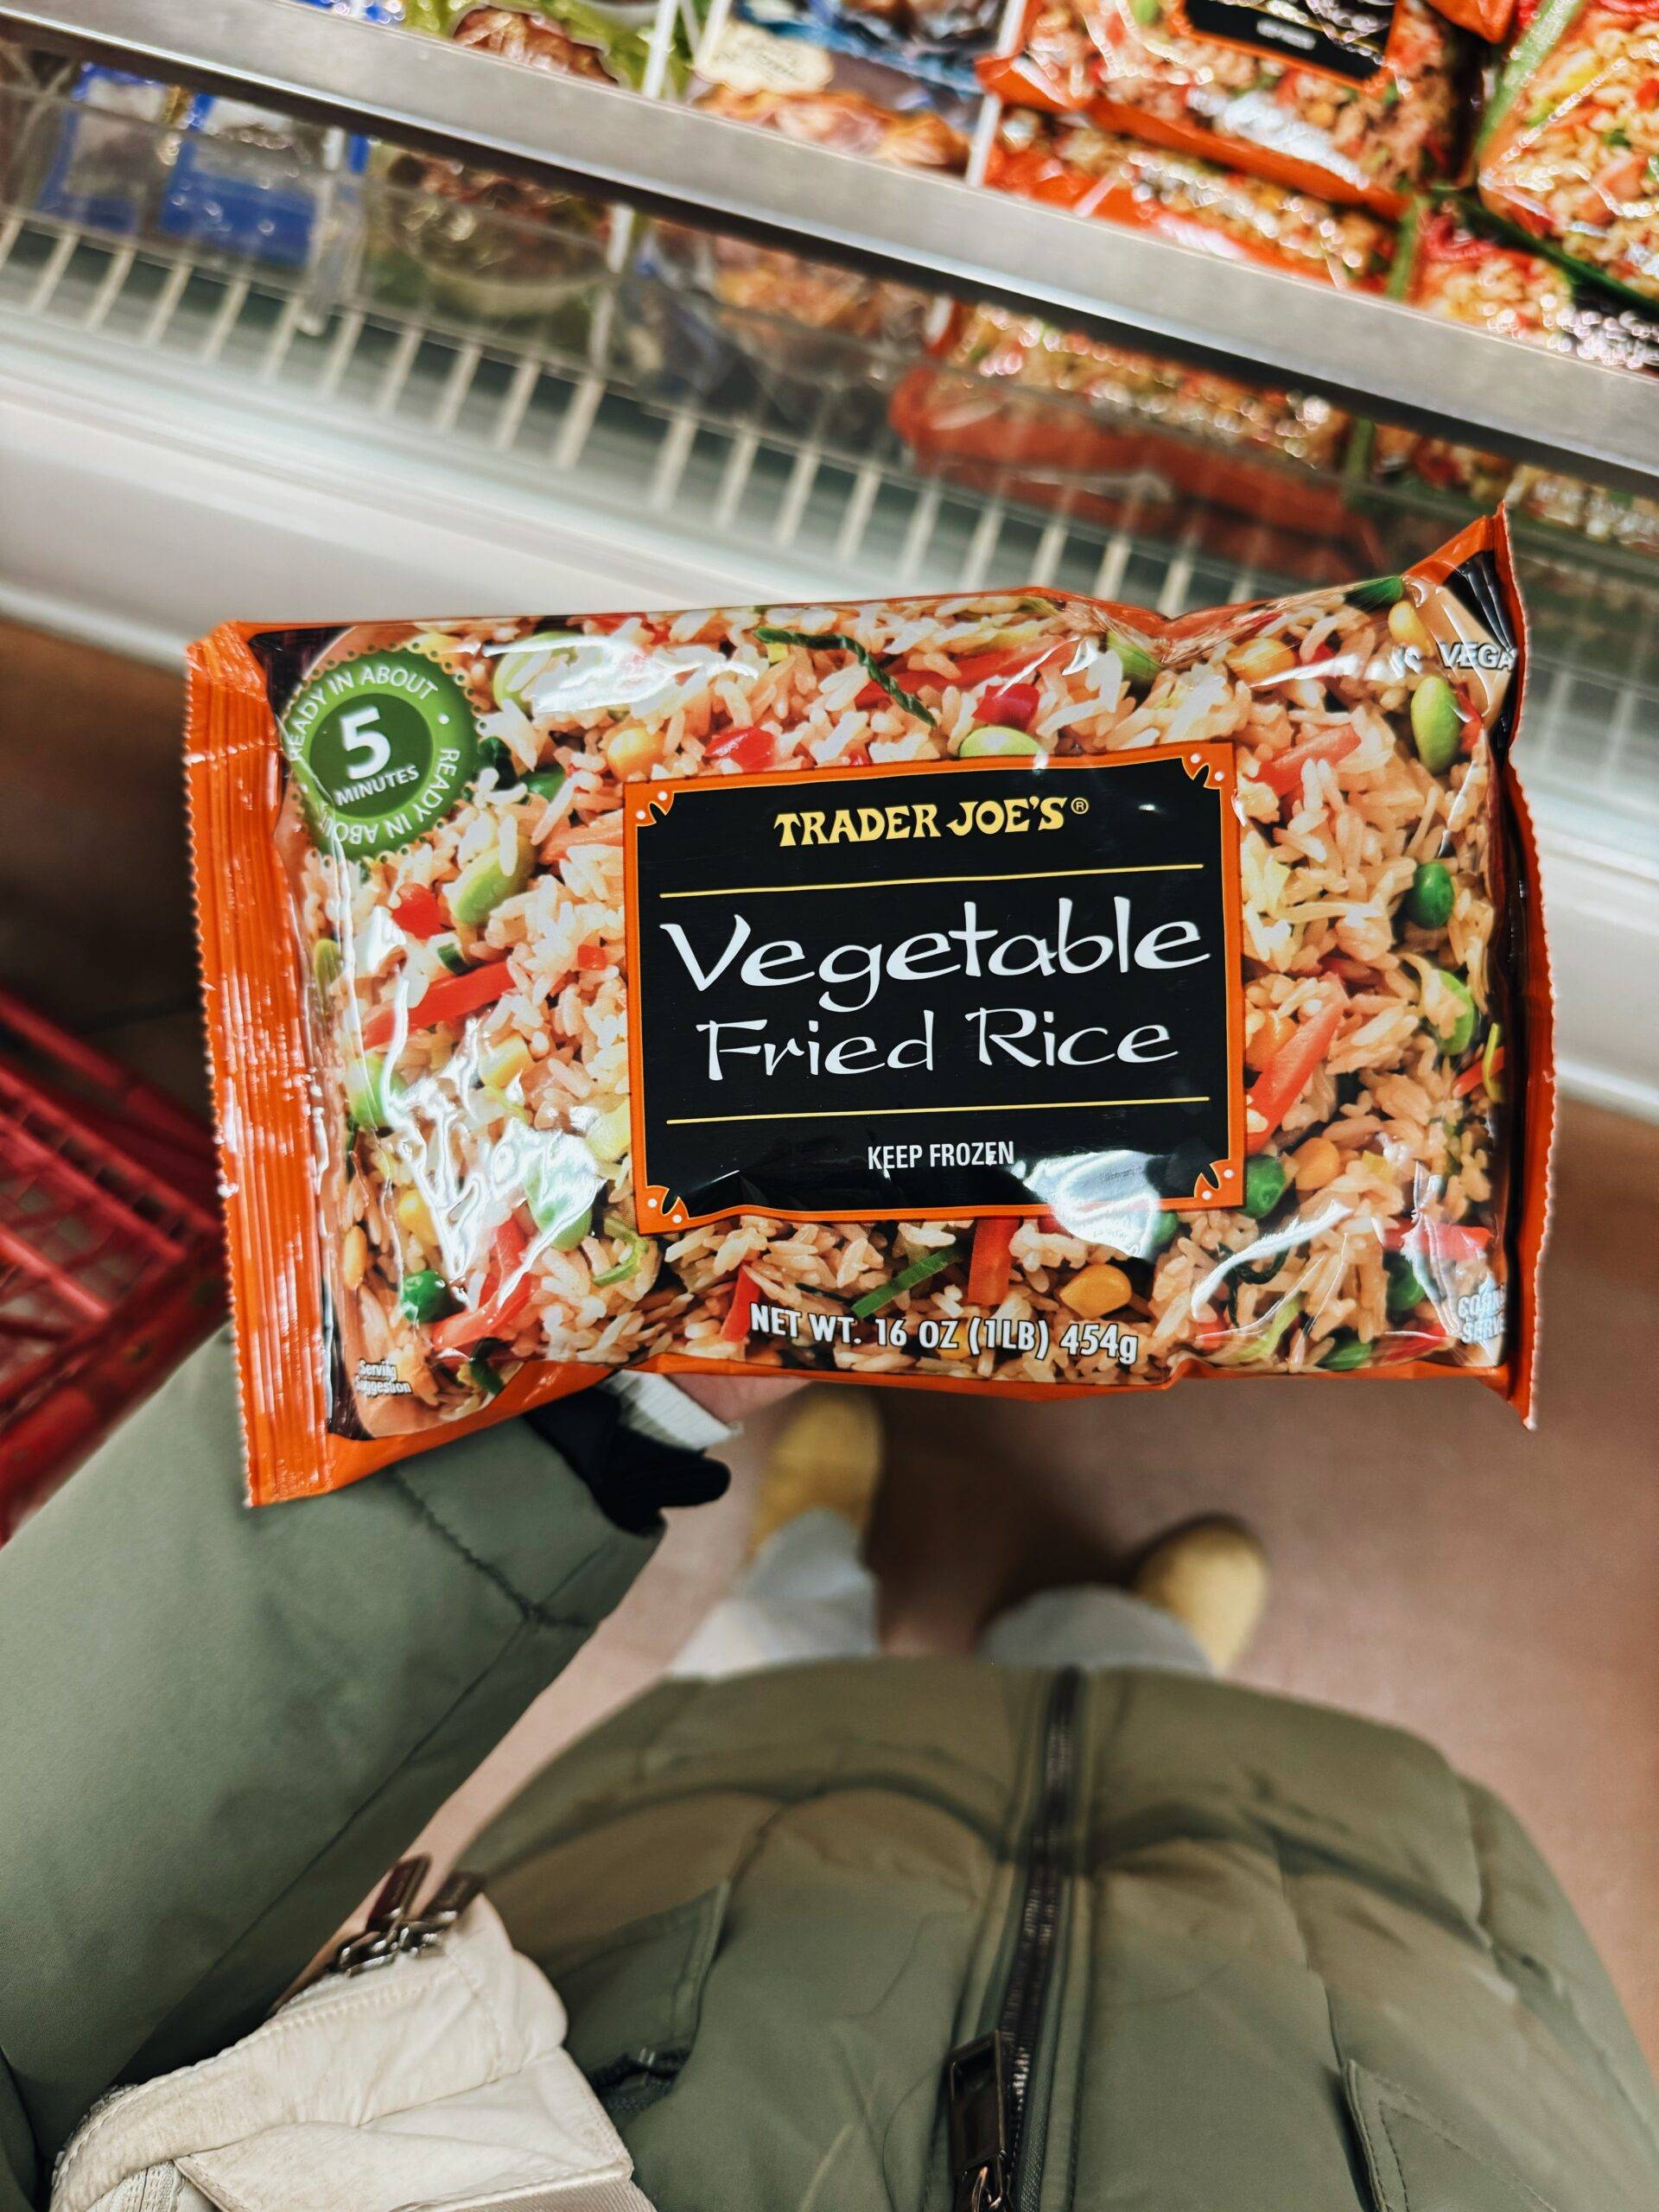 Vegetable fried rice in a bag.